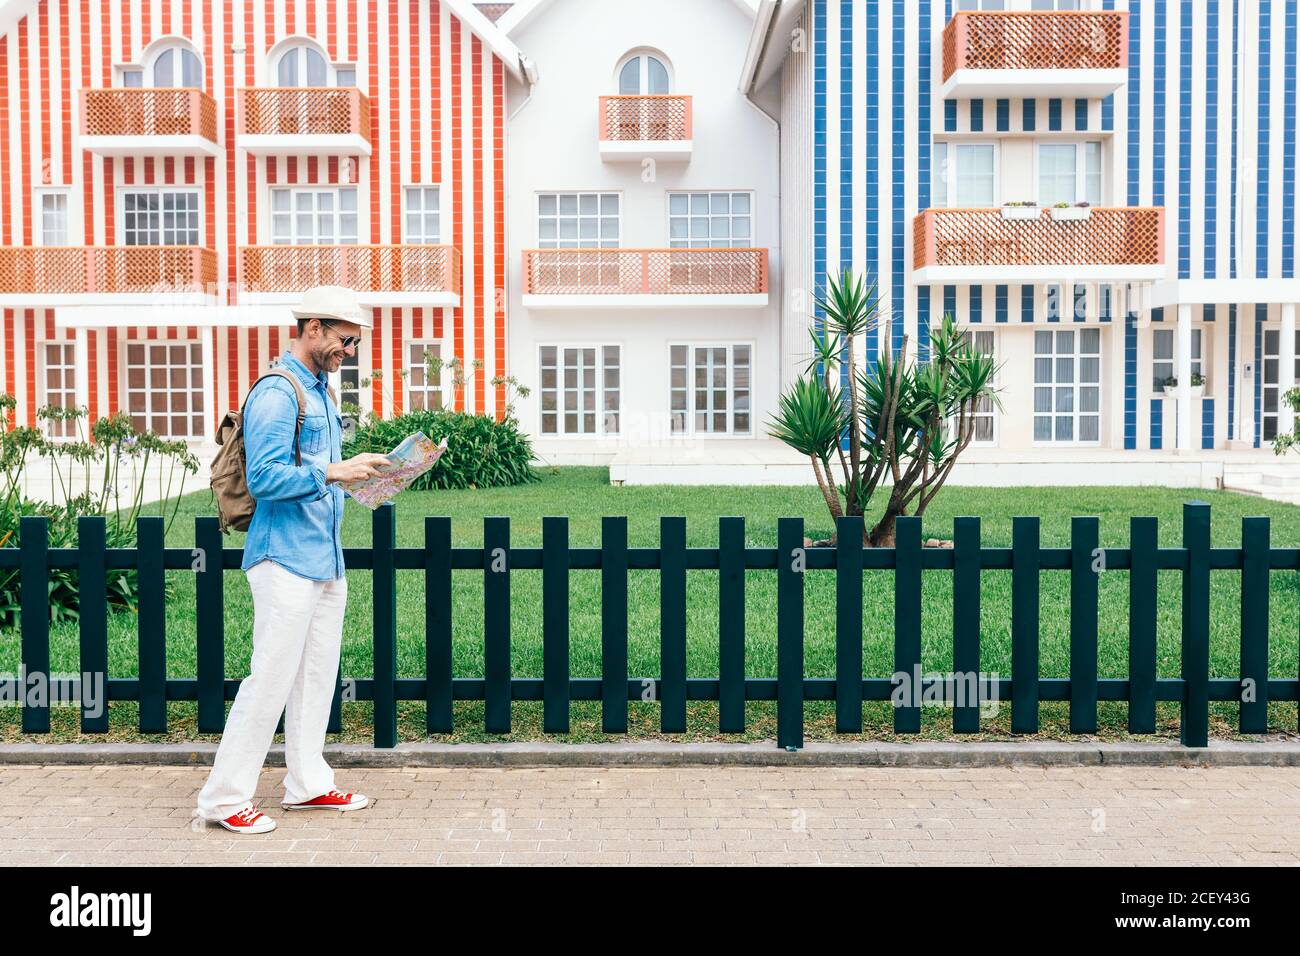 Side view of trendy man with backpack and mat walking against striped colorful houses on Costa Nova do Prado in Portugal Stock Photo